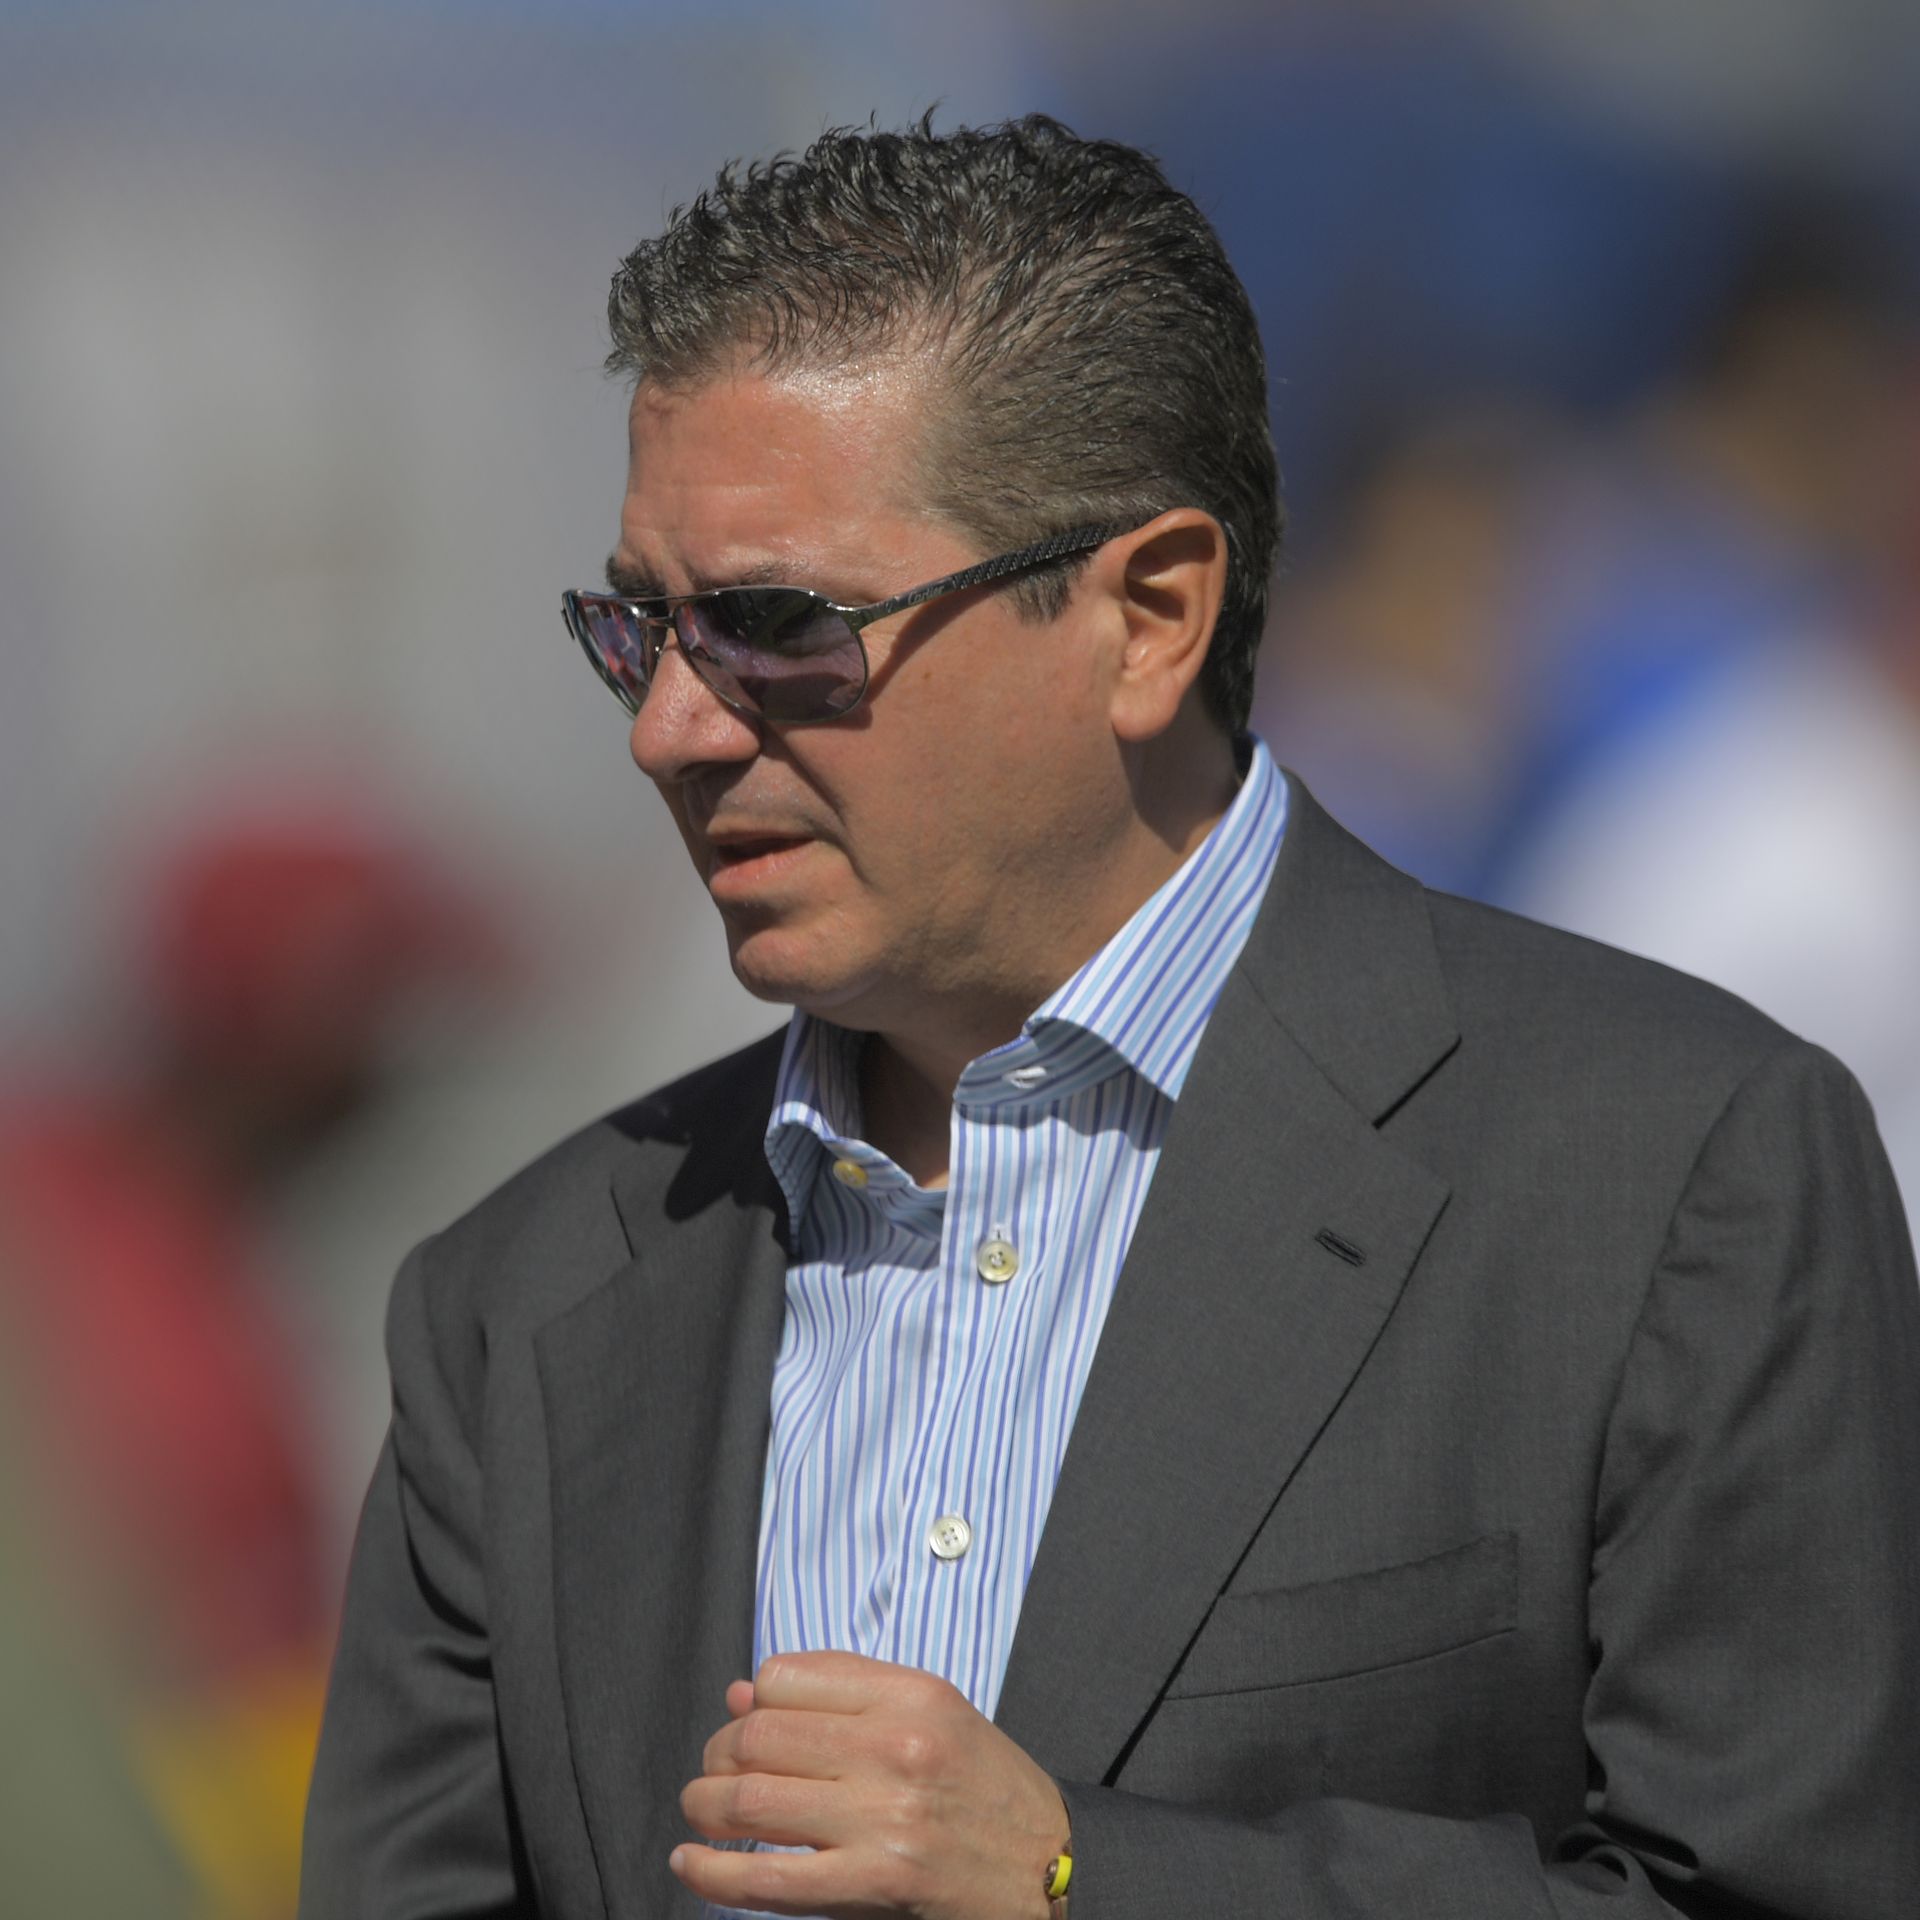 Dan Snyder allegedly obstructed House probe into Washington